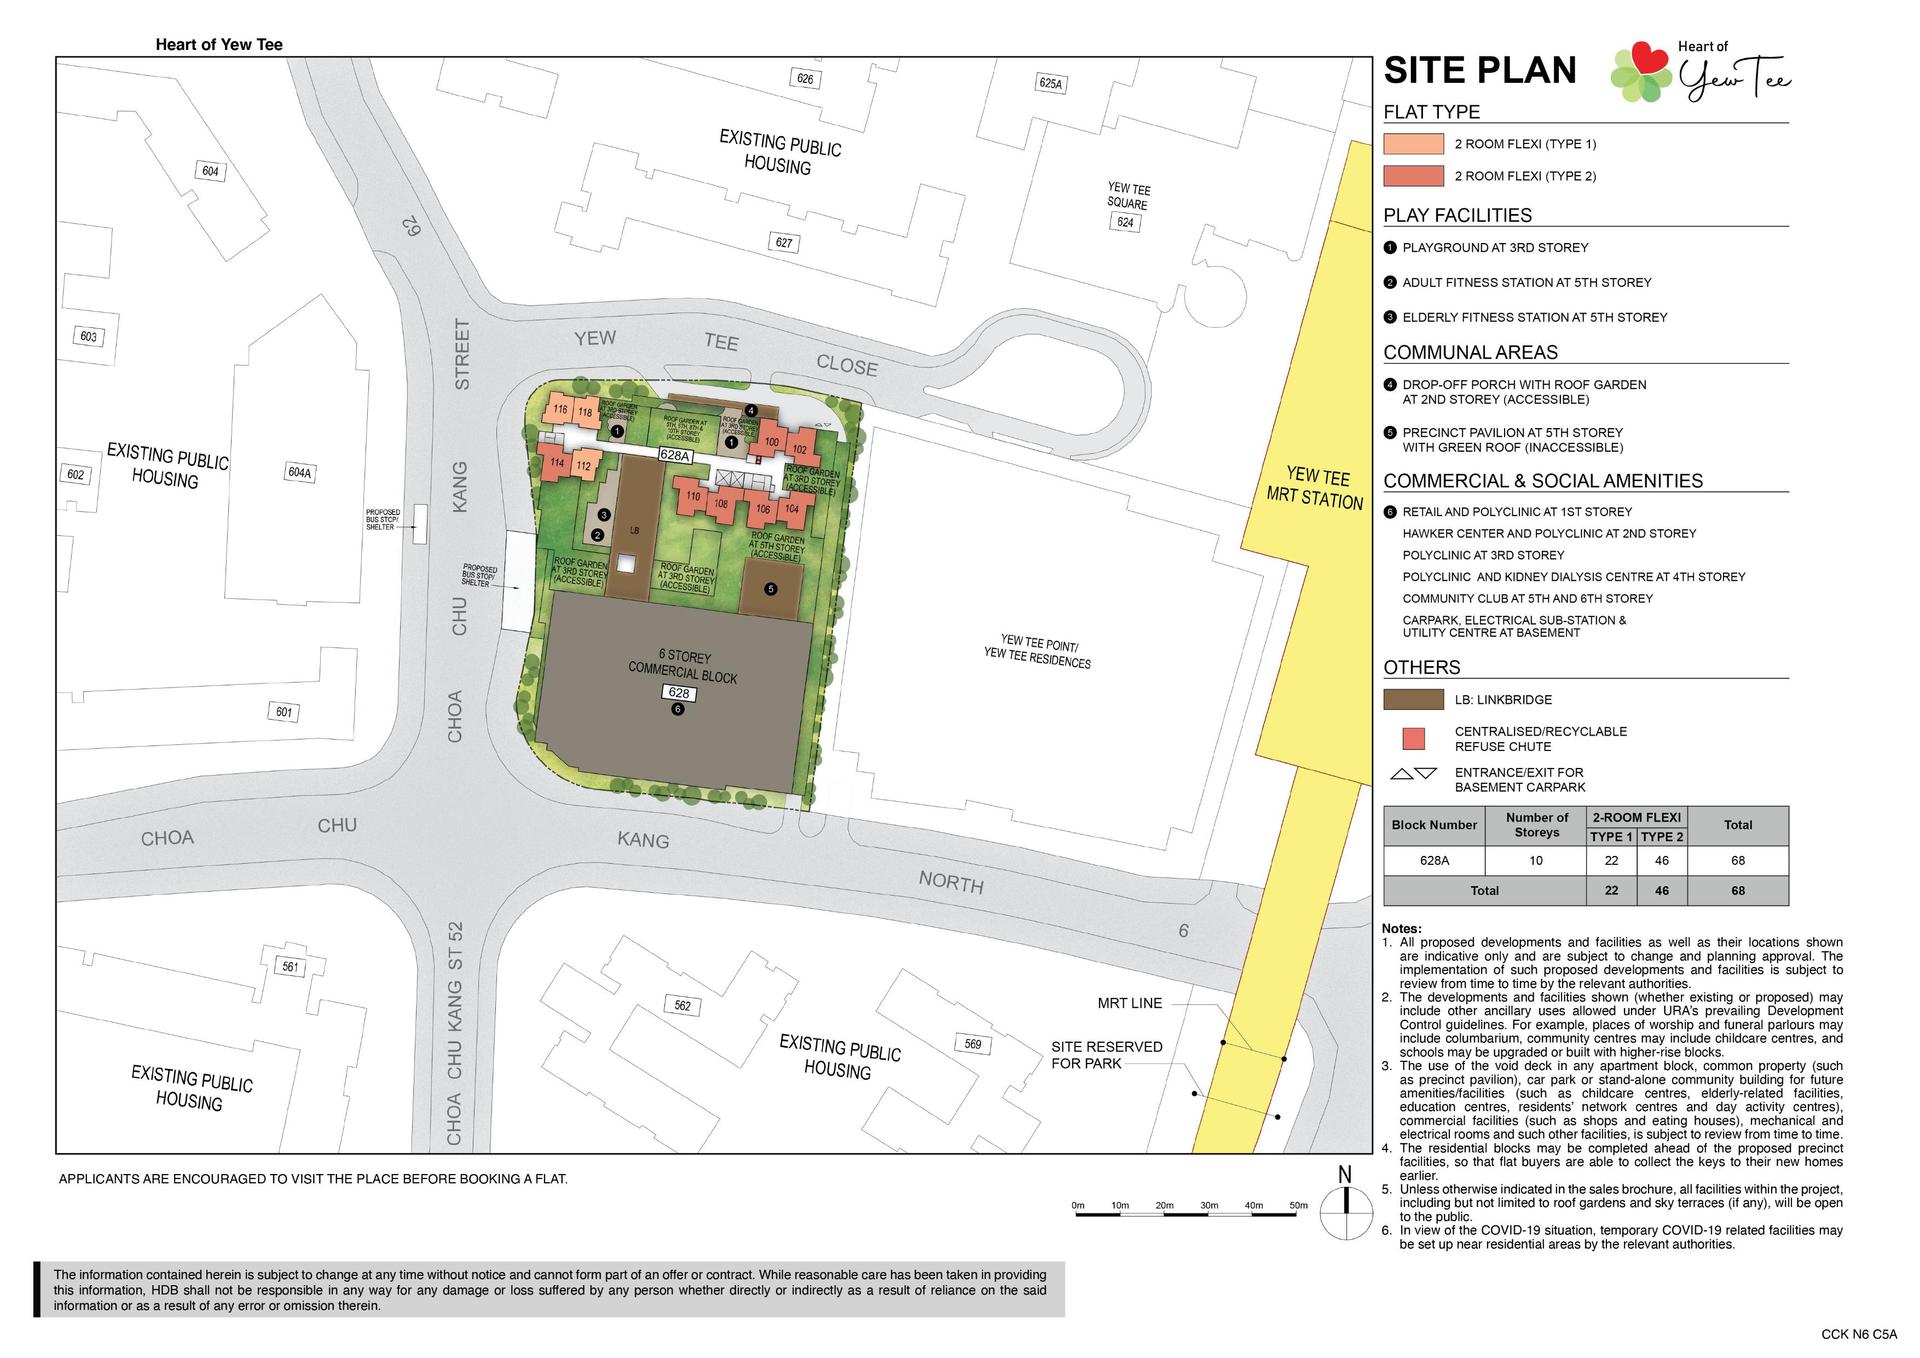 Heart of Yew Tee - site plan